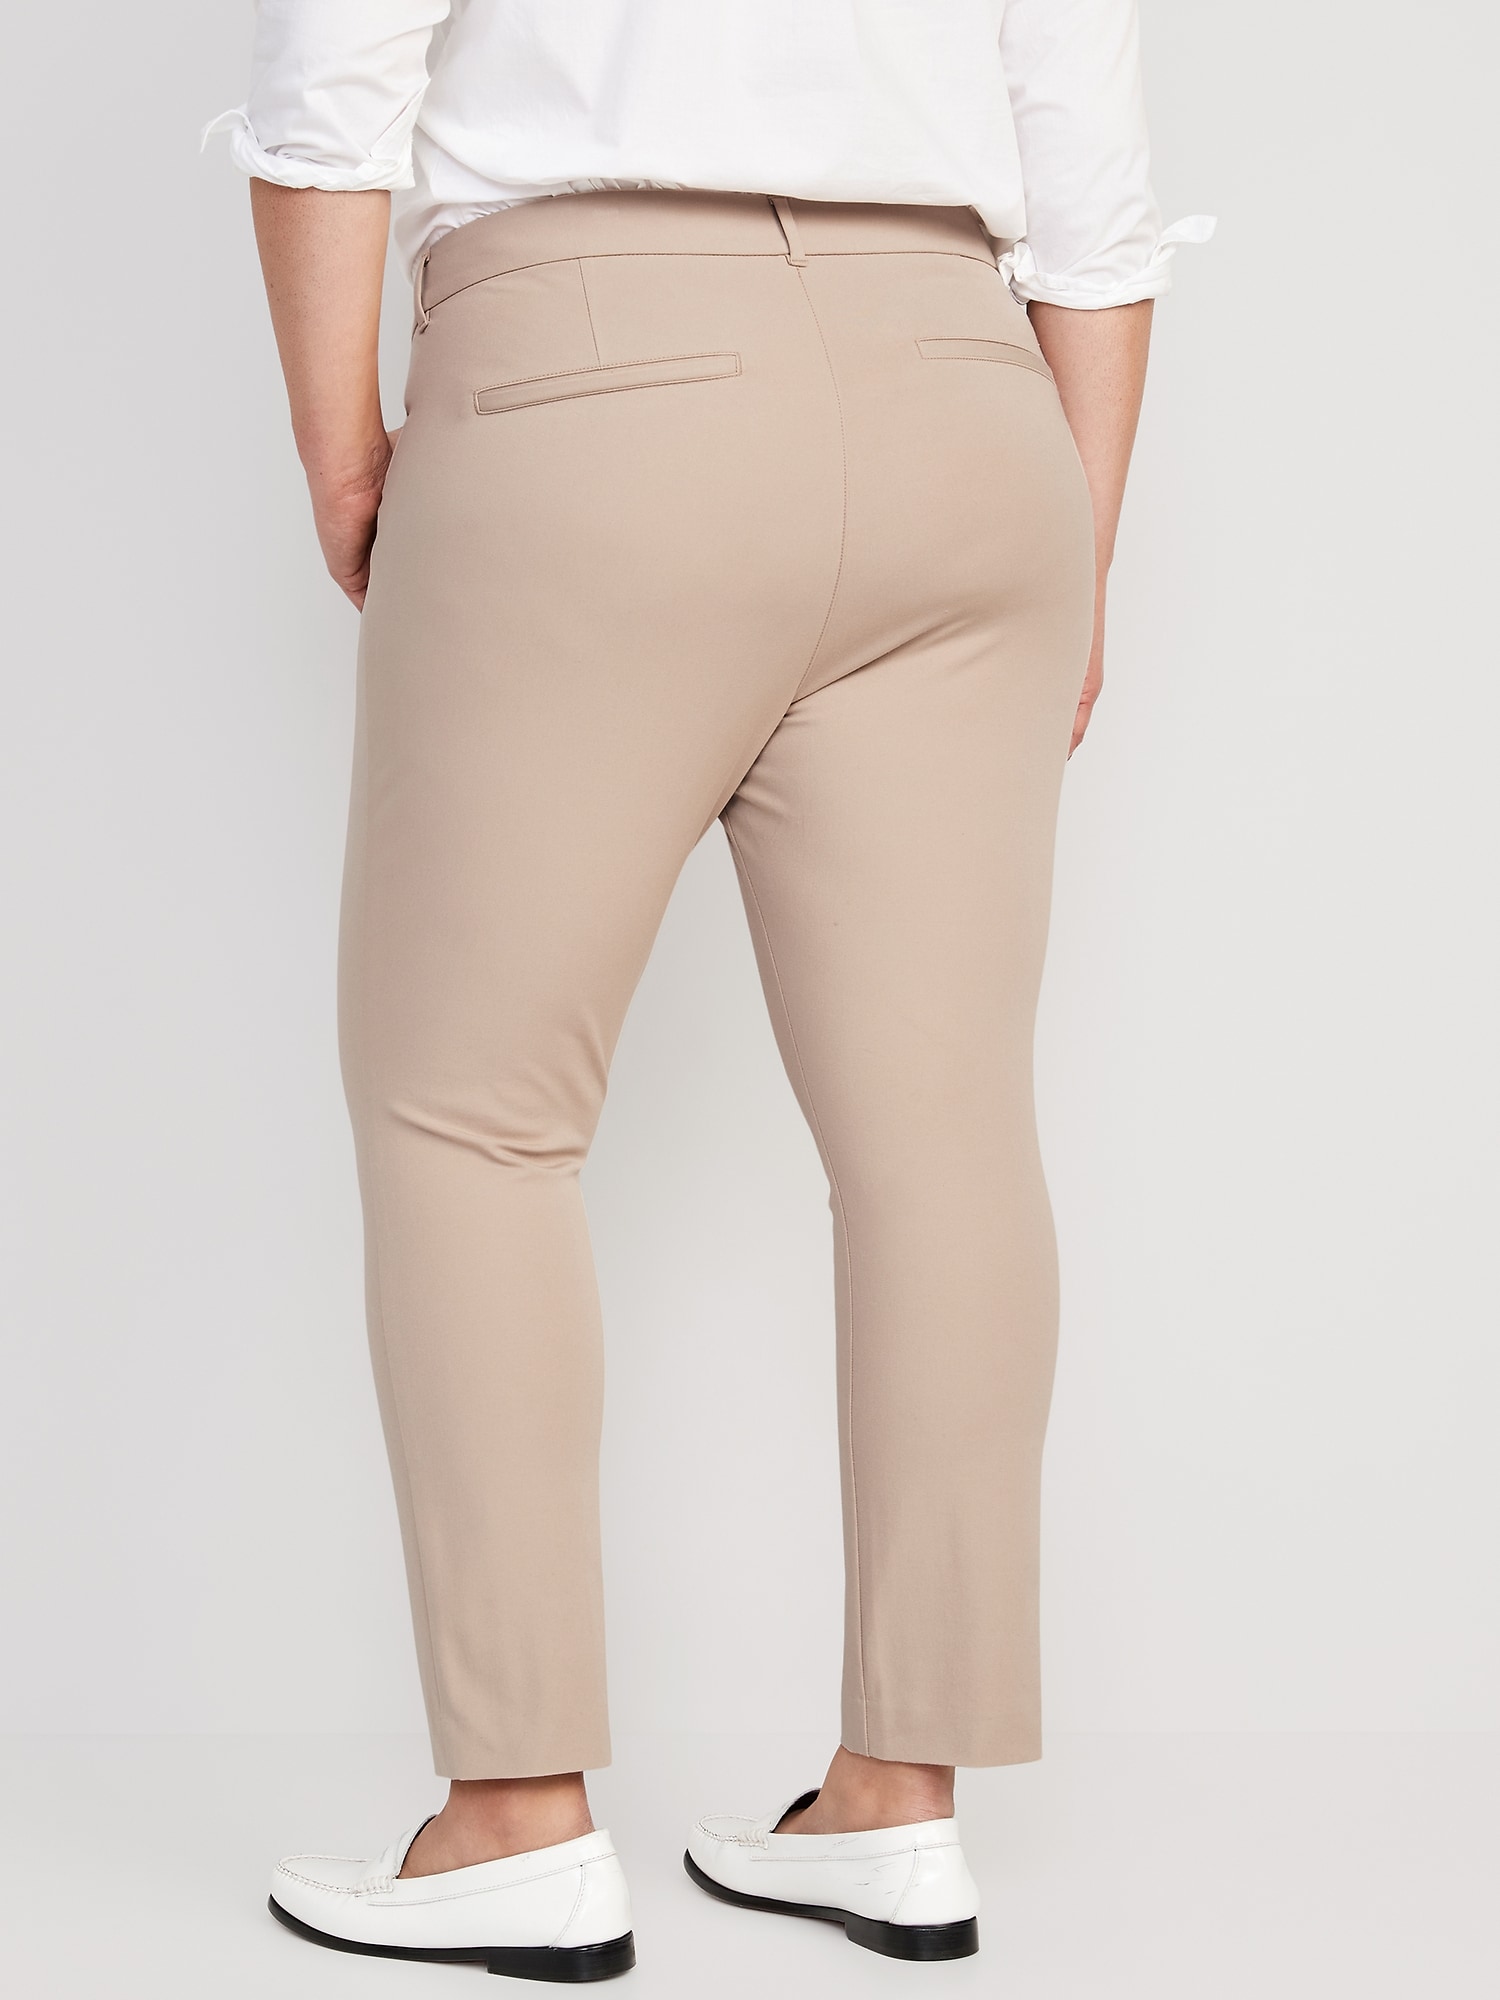 Old navy pixie pants $20 today , online & in-store : r/FrugalFemaleFashion